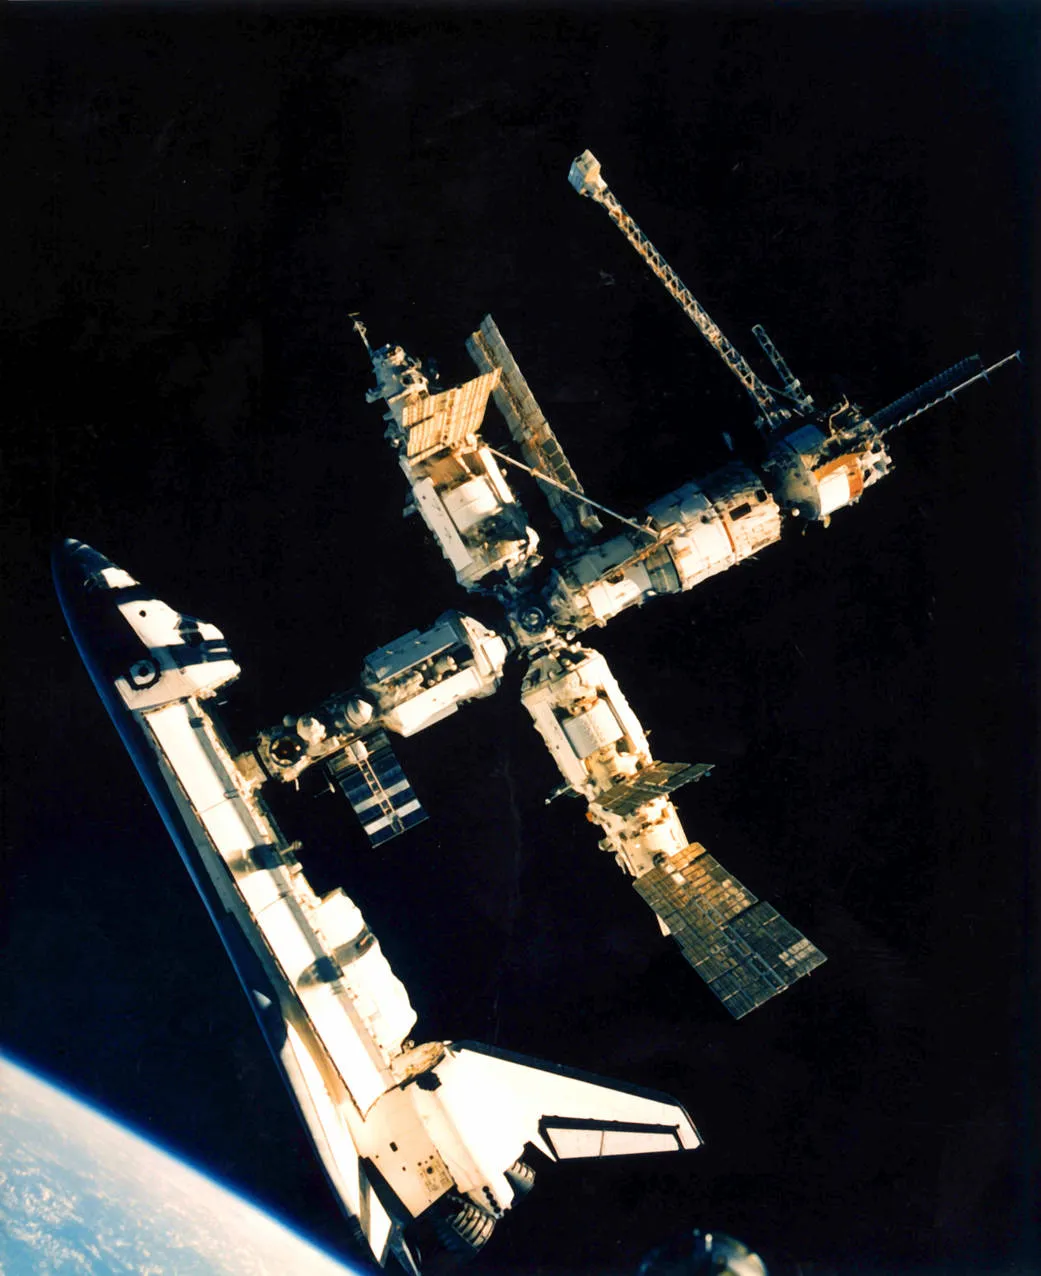 Atlantis makes the first ever Space Shuttle docking with the Russian Mir space station, 29 June 1995. Credit: NASA